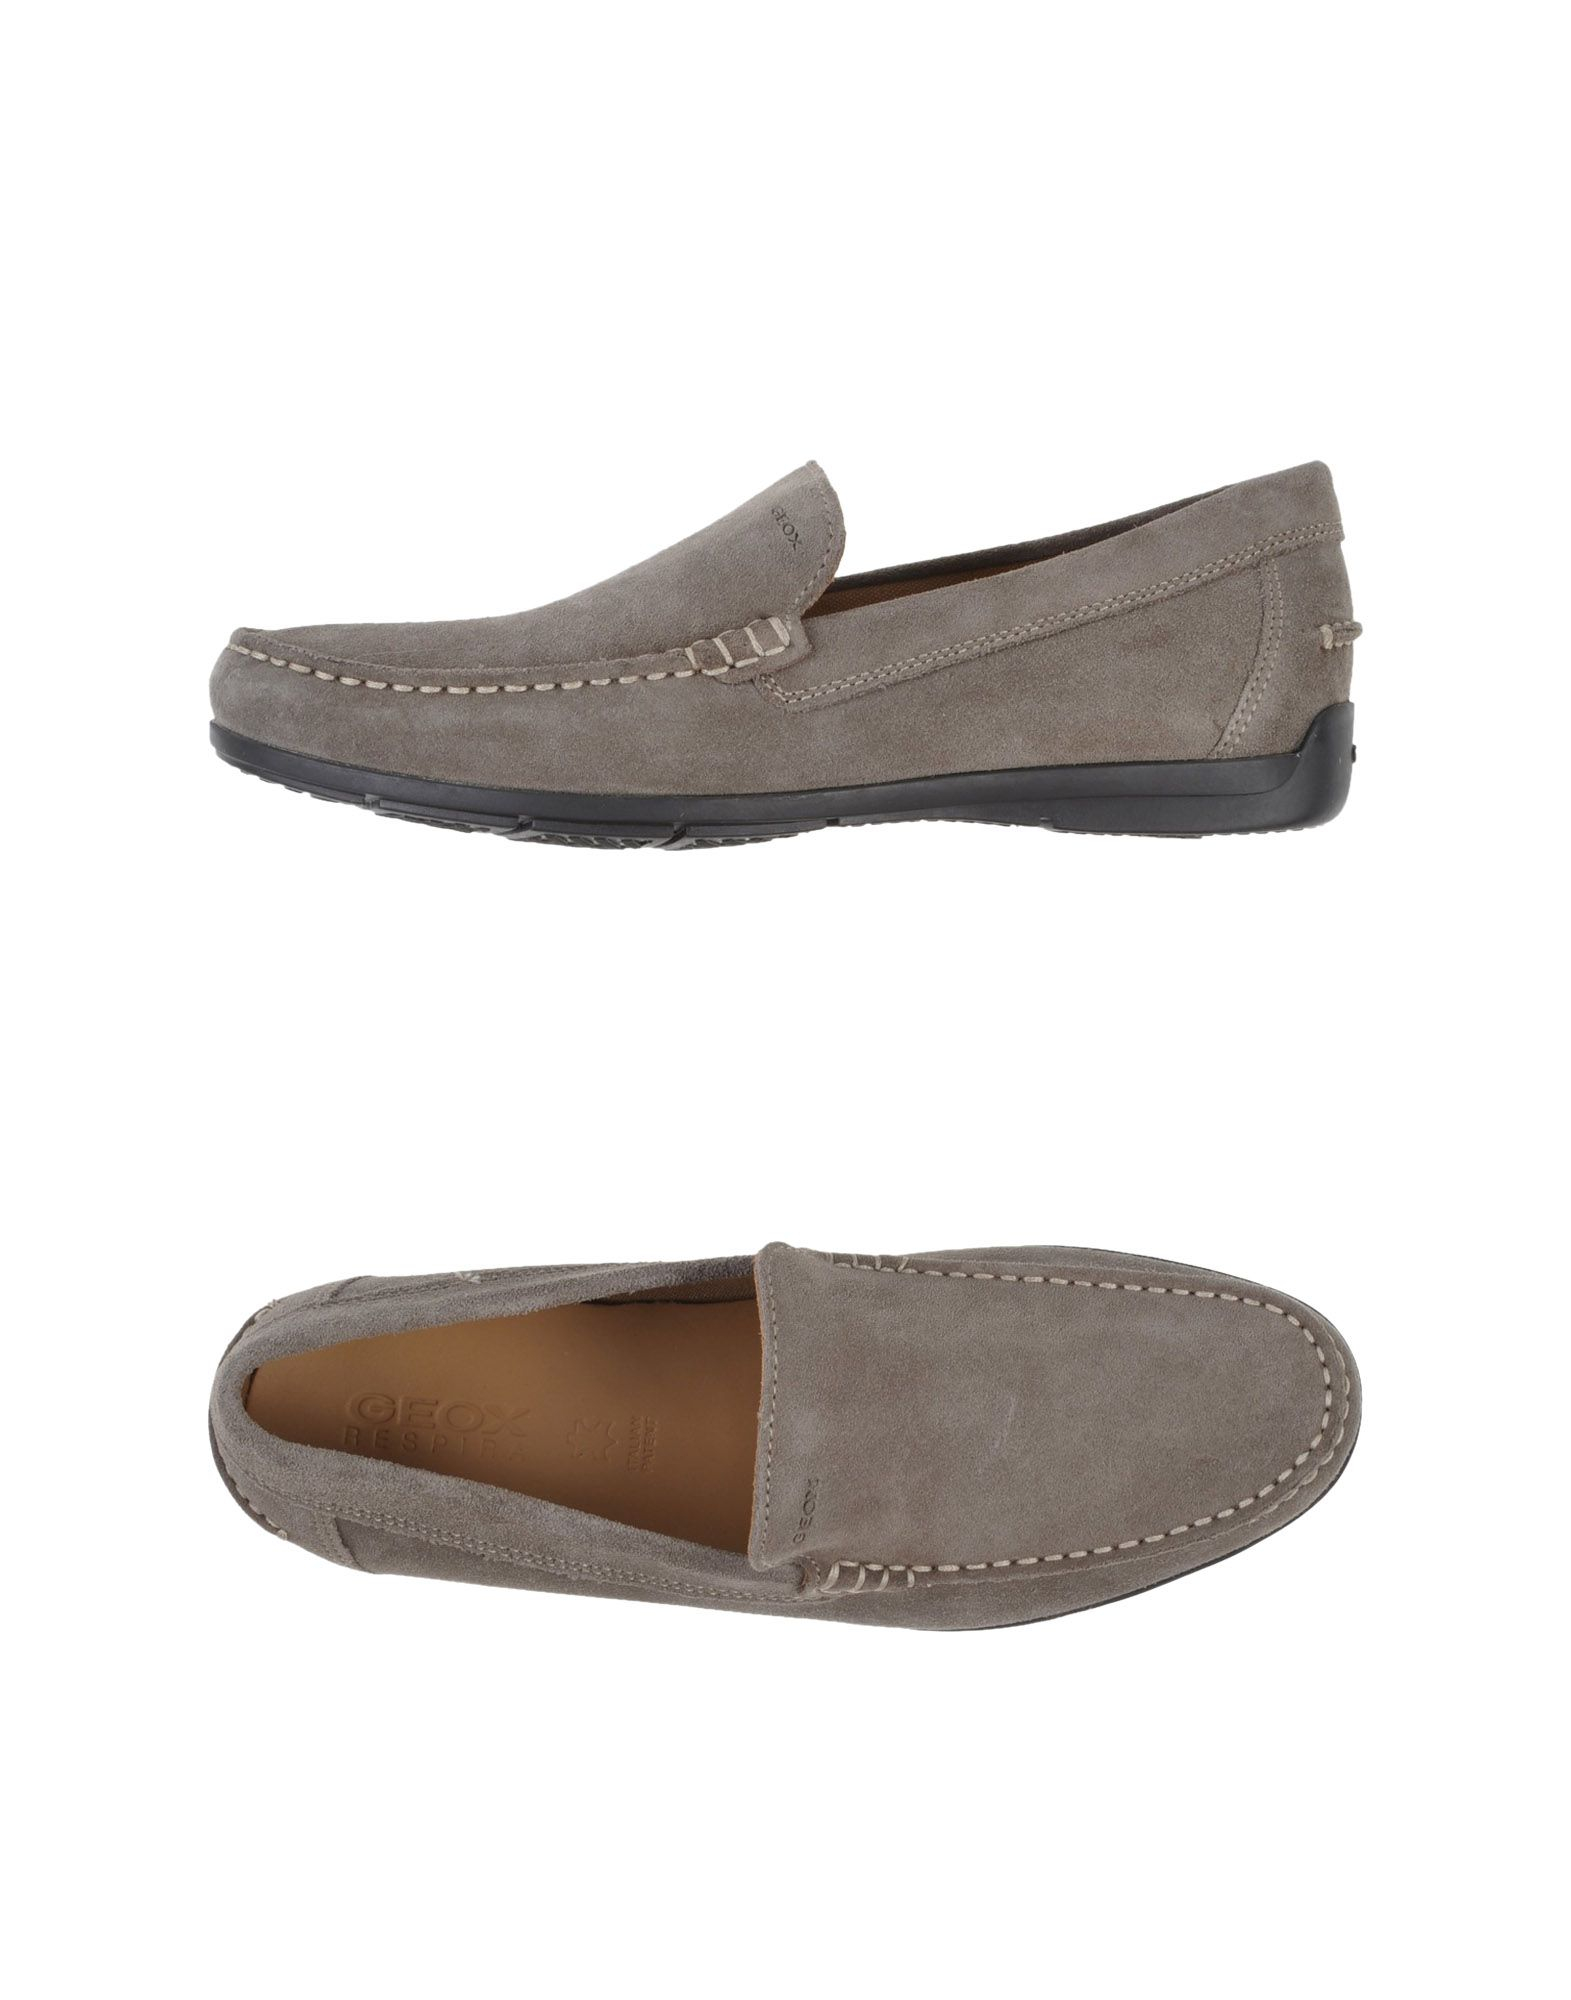 Lyst - Geox Moccasins in Gray for Men